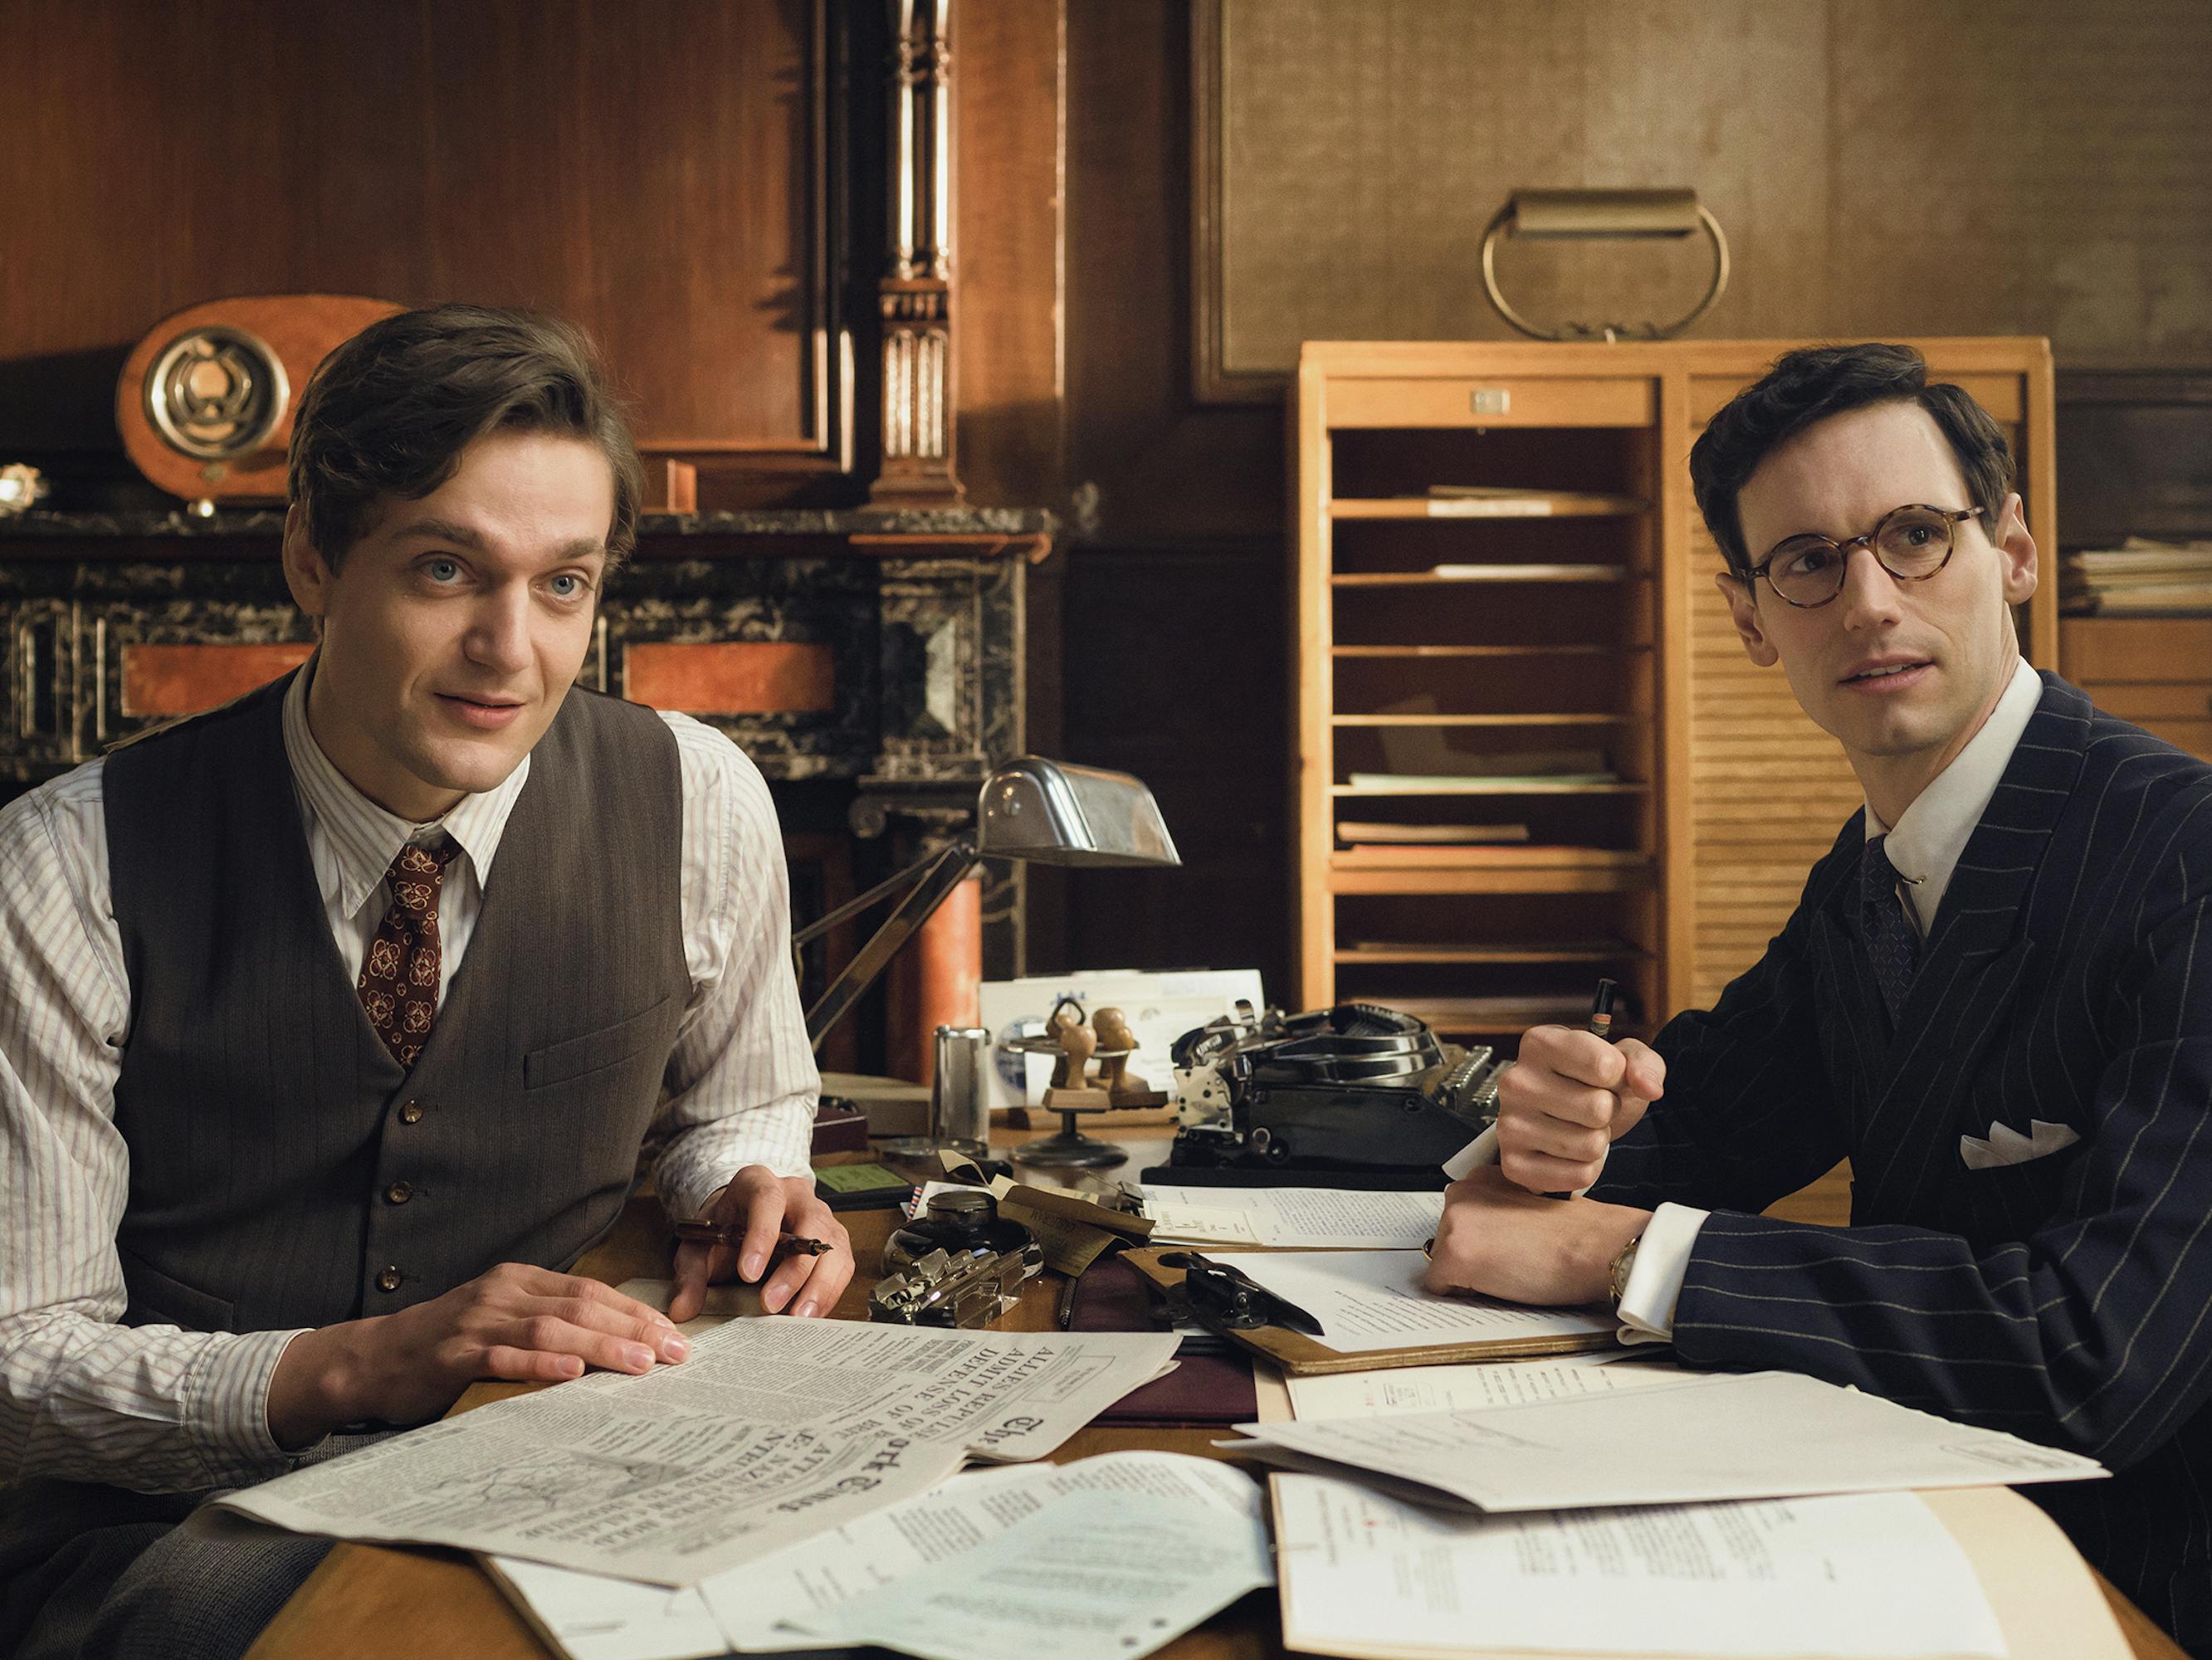 Albert Hirschman (Lucas Englander) and Varian Fry (Cory Michael Smith) sit at a desk reading through some papers looking at someone offscreen. Both wear sharp suits and look very prim.